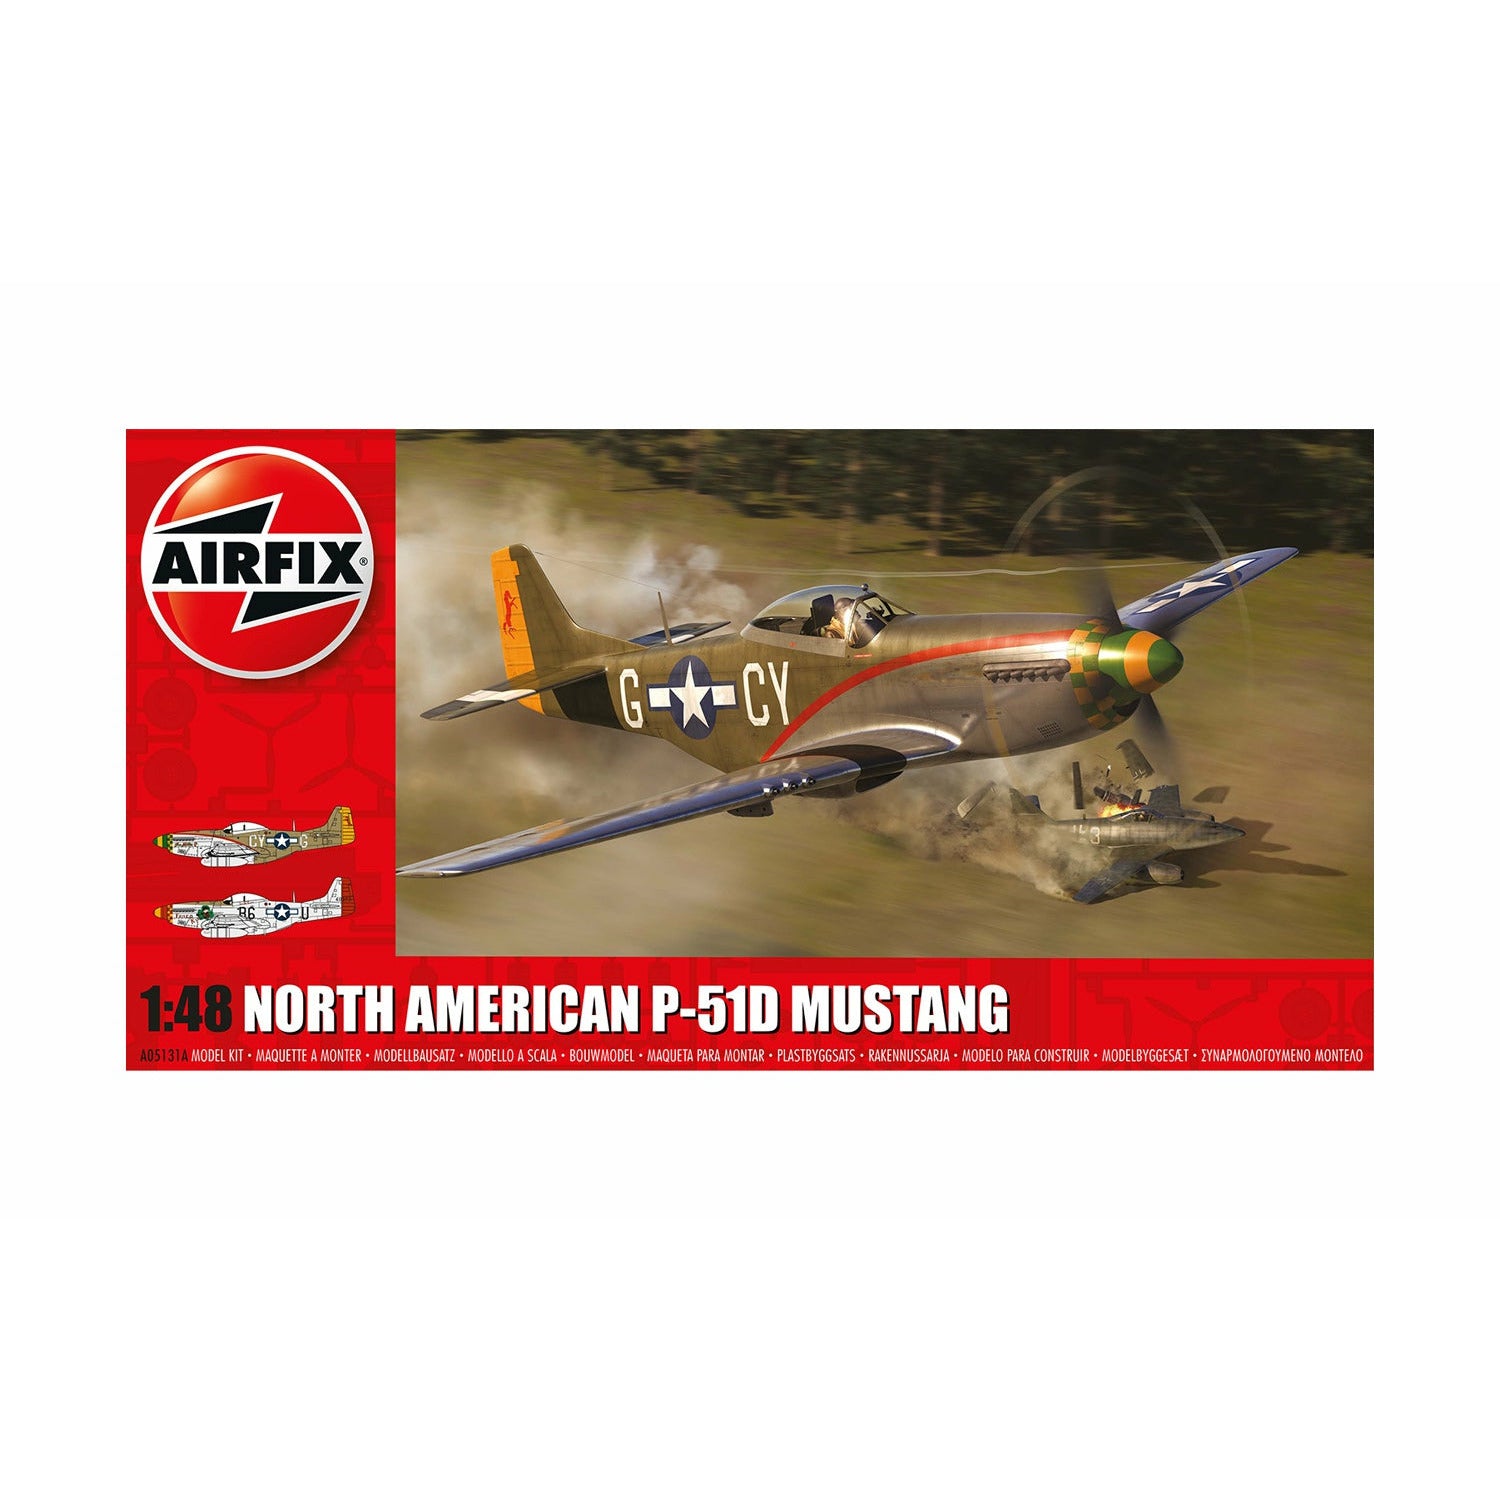 North American P-51d Mustang 1/48 #05131A by Airfix